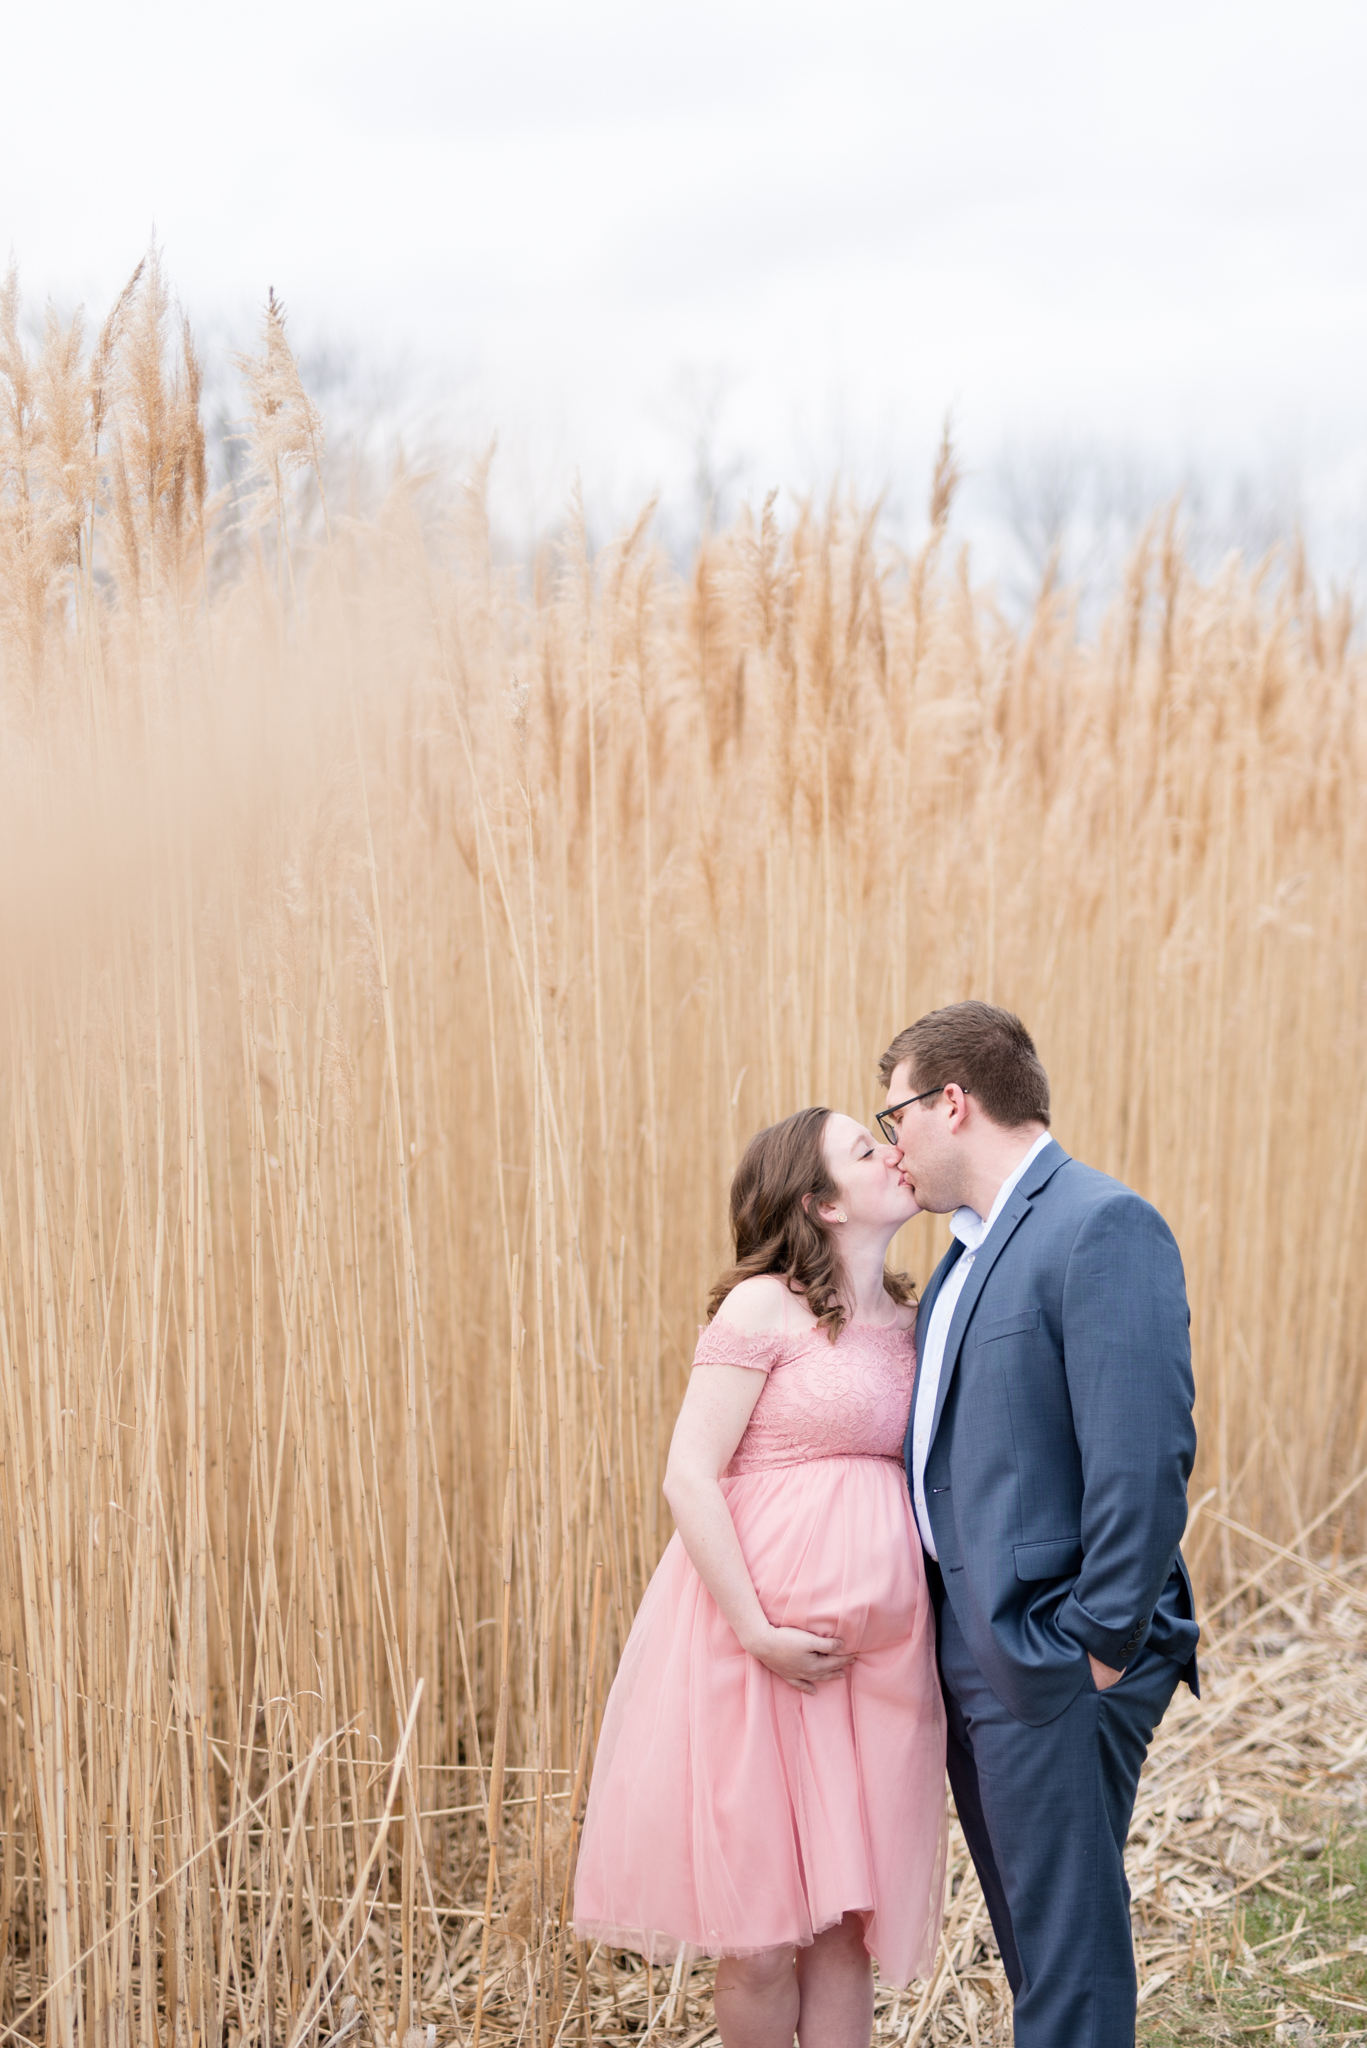 expecting parents kiss in front of wheat field.